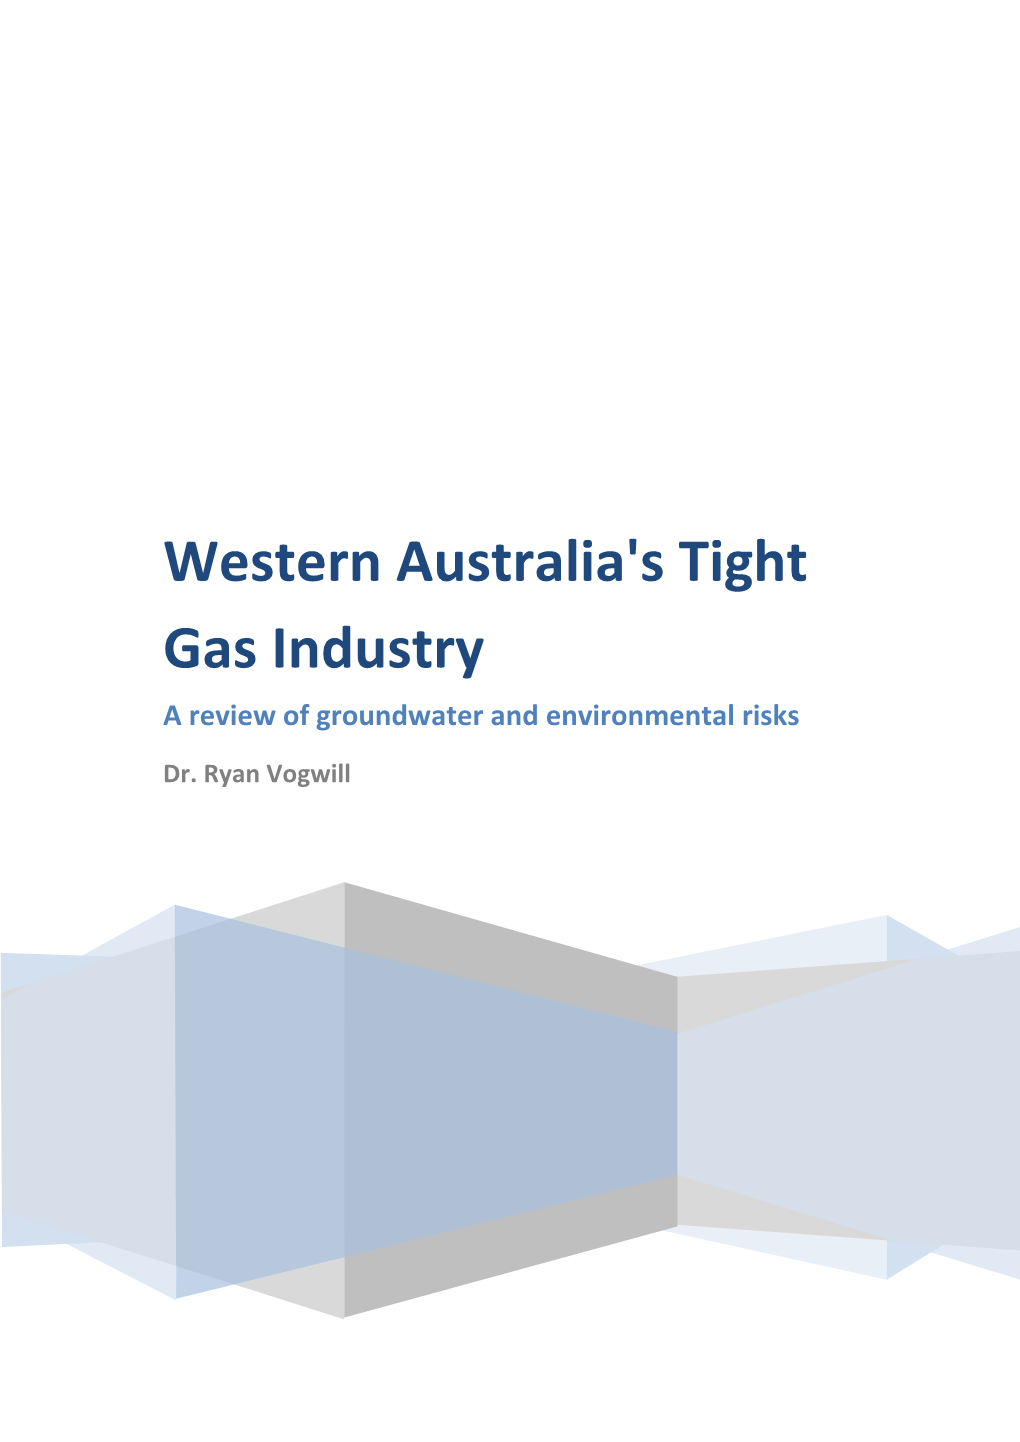 Western Australia's Tight Gas Industry a Review of Groundwater and Environmental Risks